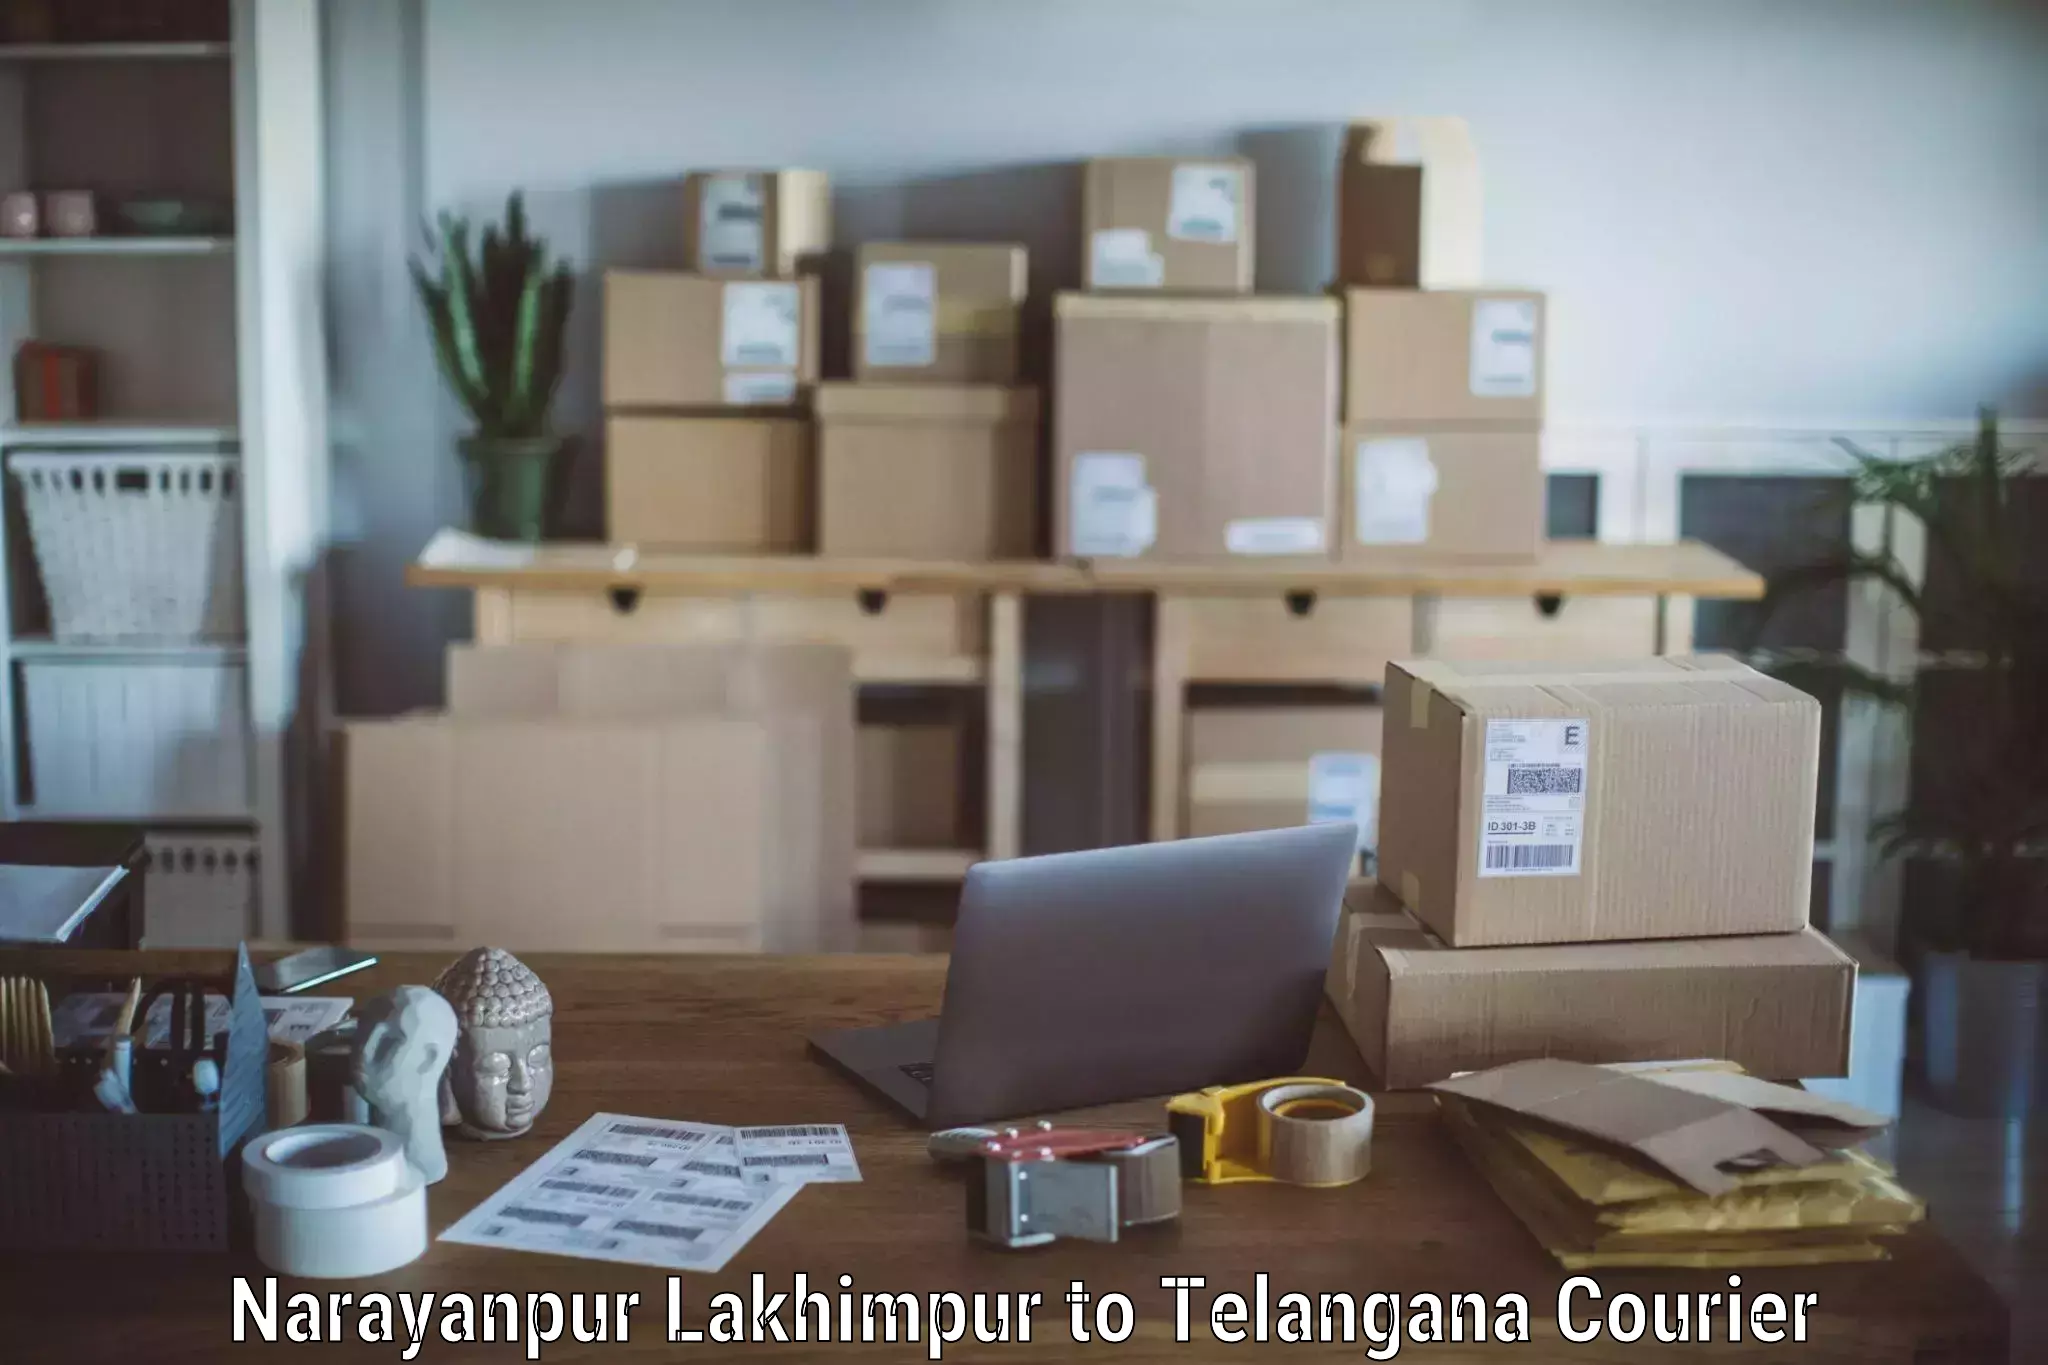 Furniture relocation experts Narayanpur Lakhimpur to University of Hyderabad